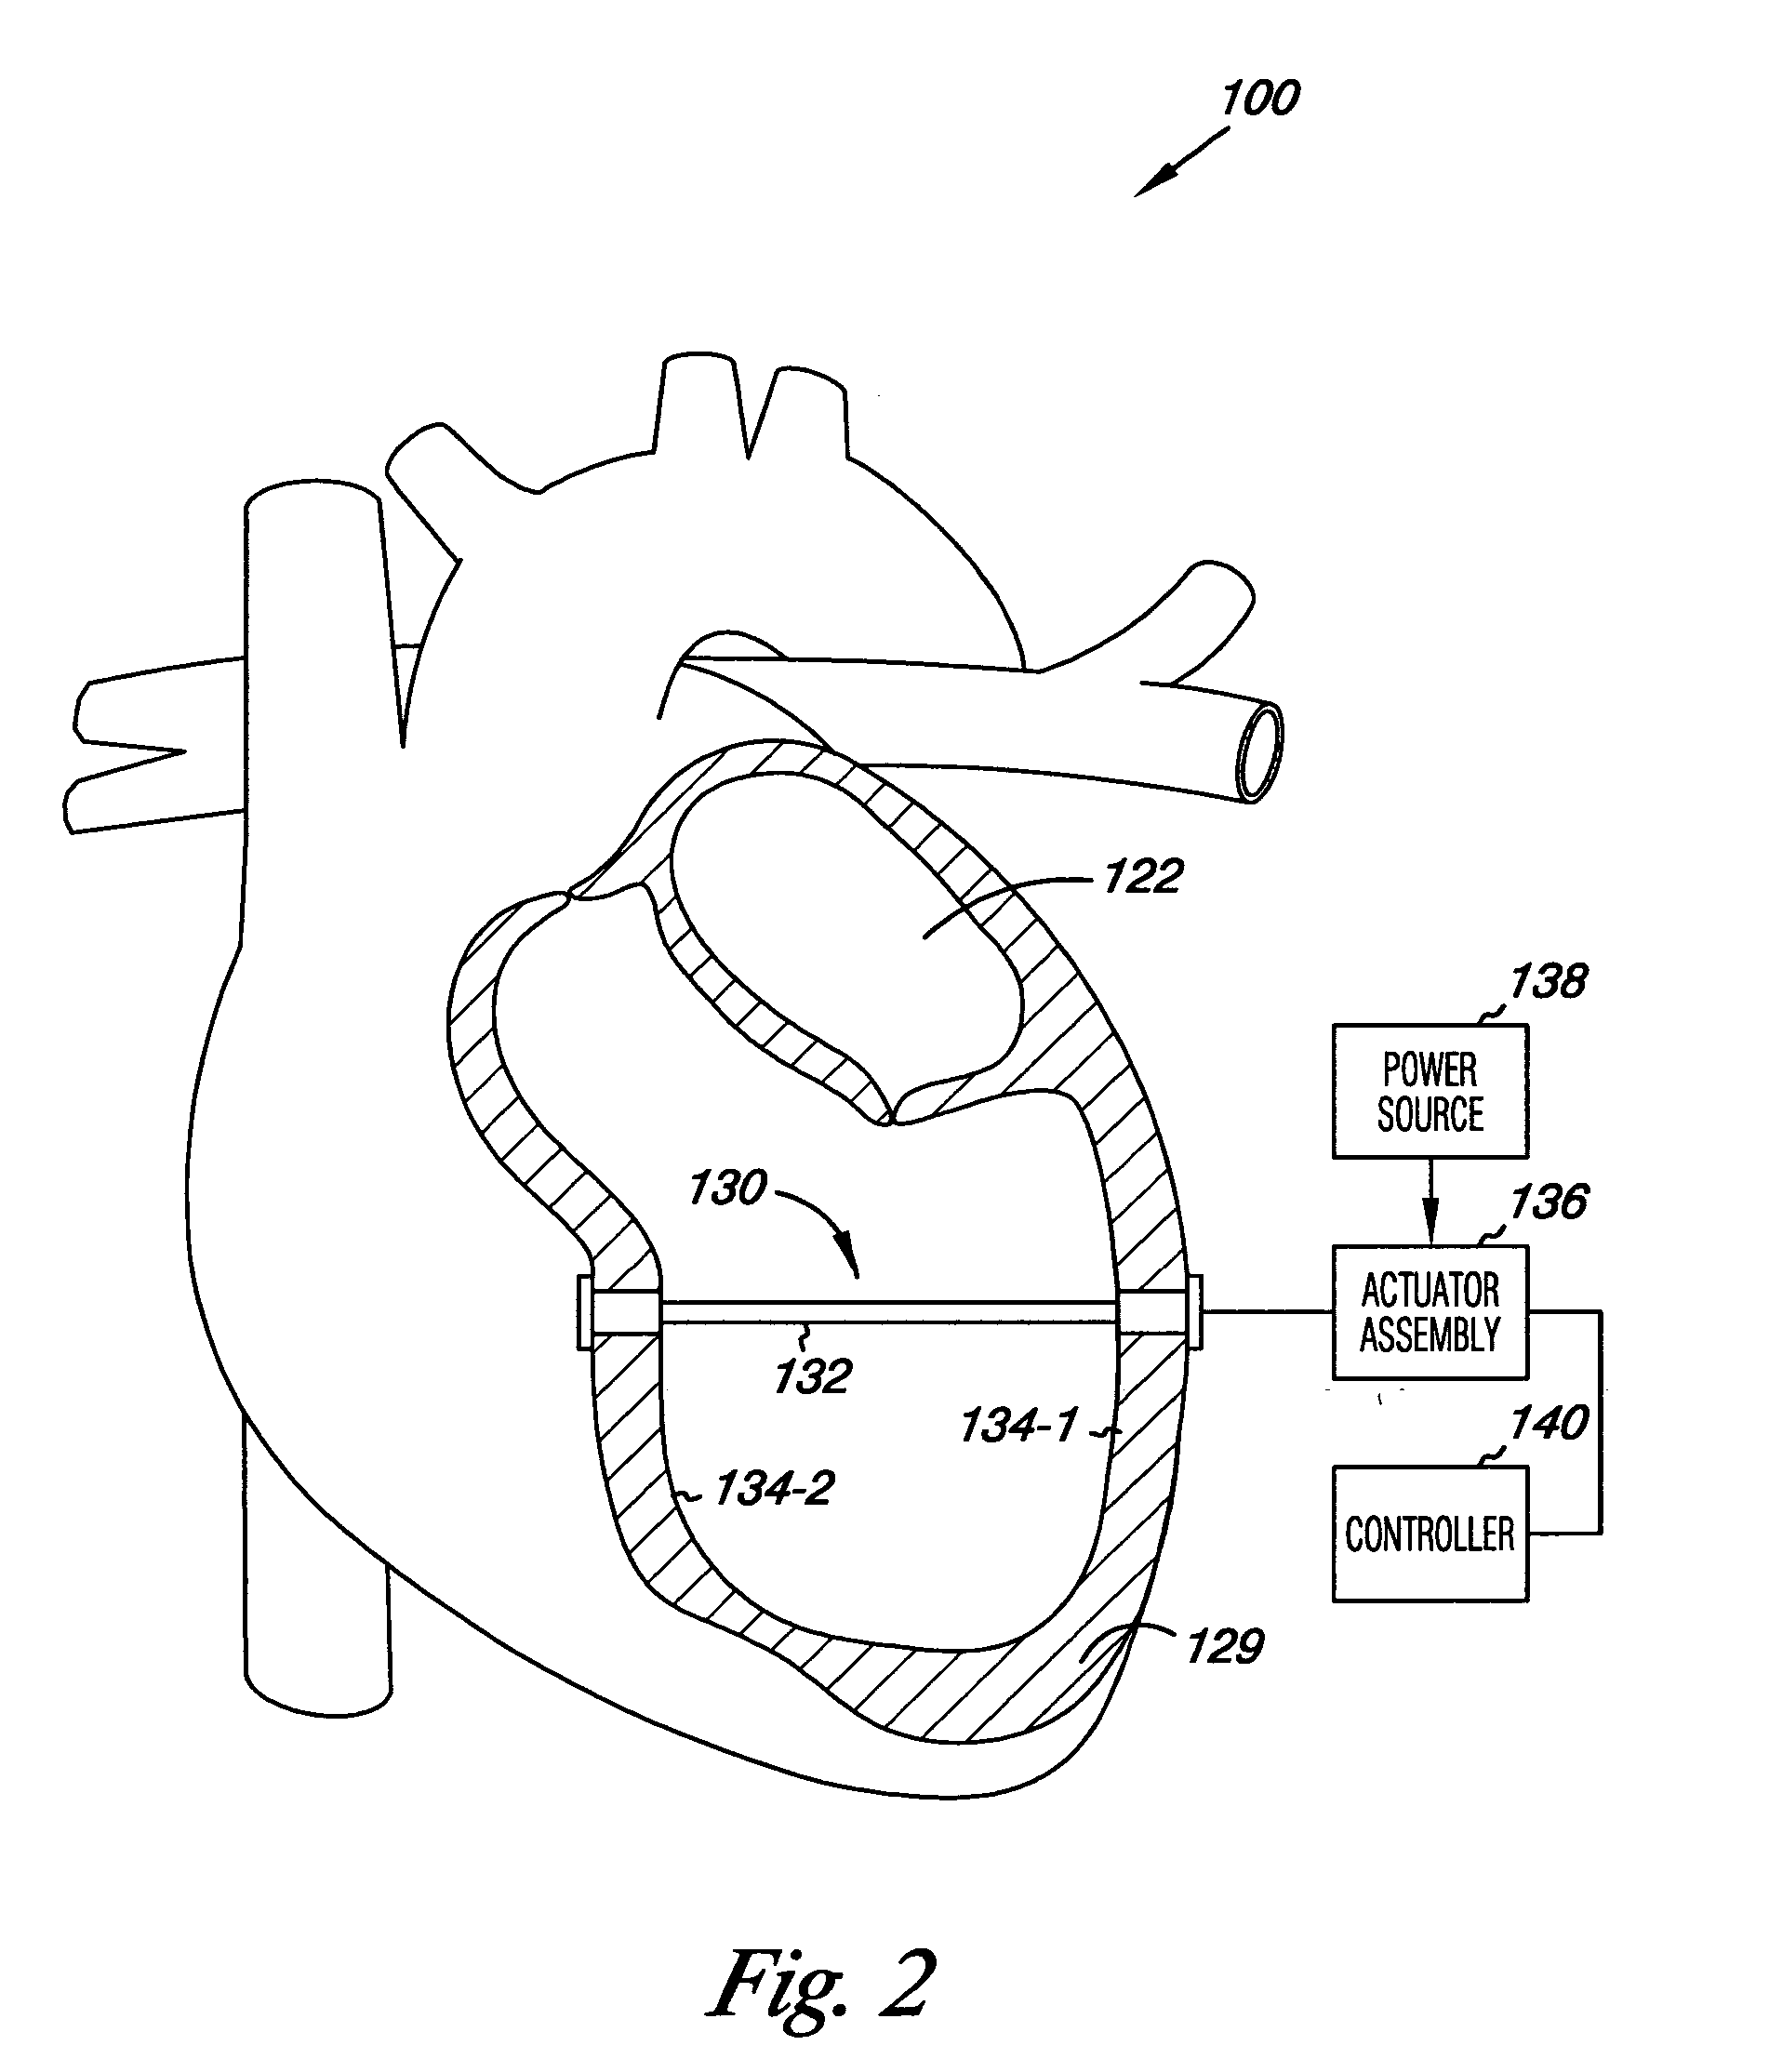 Ventricular assist and support device